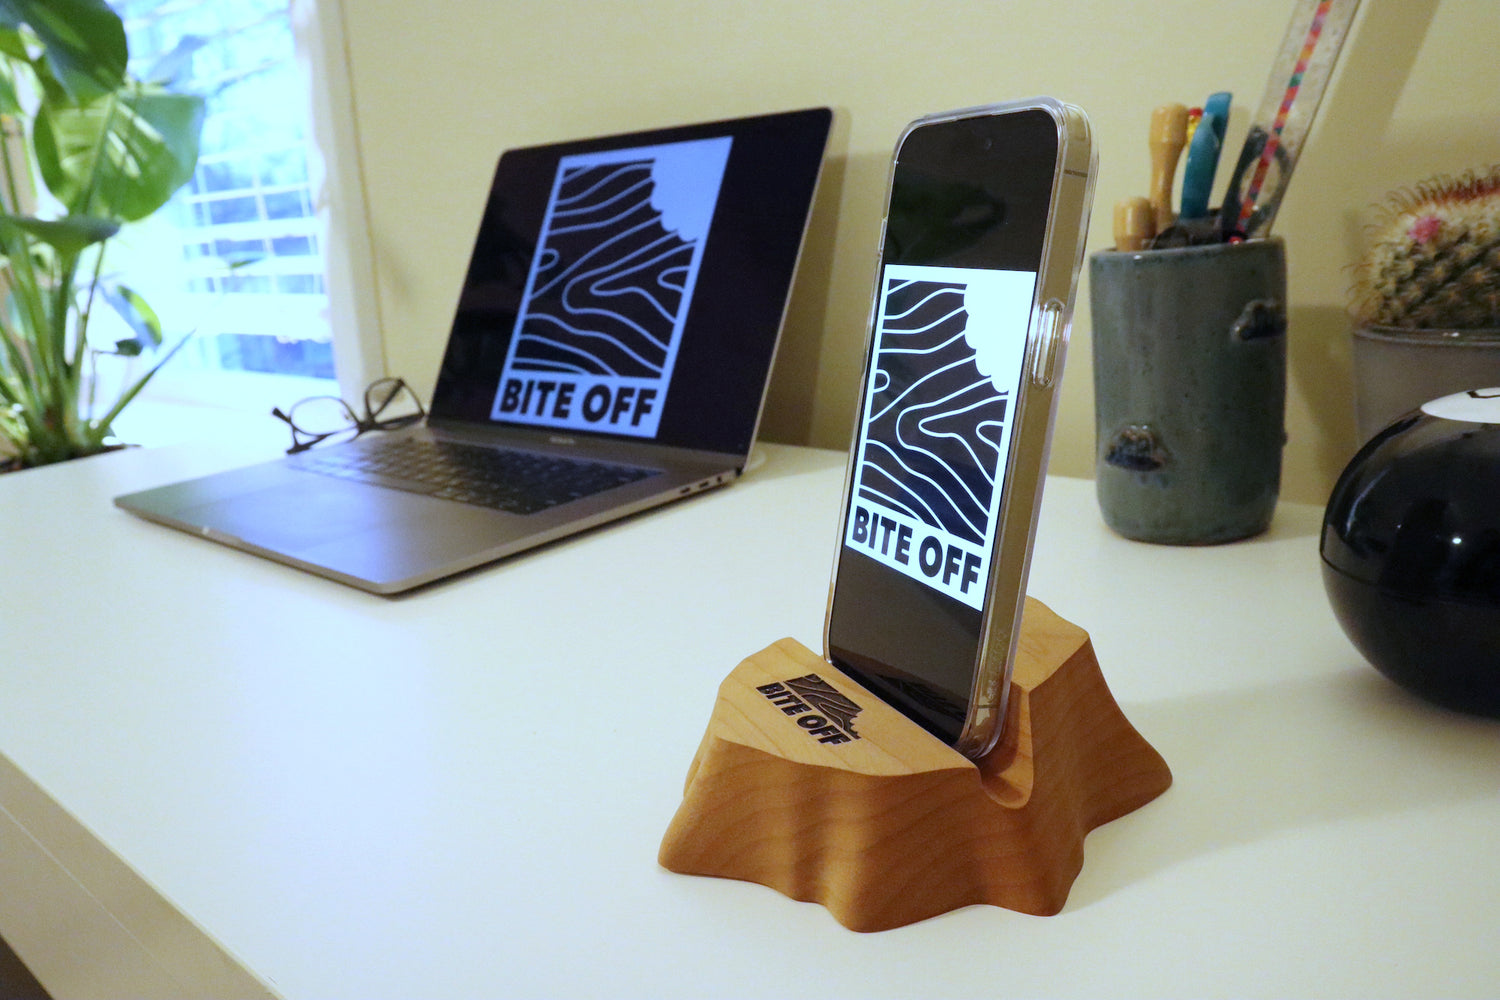 Bite off phone and tablet stands collection